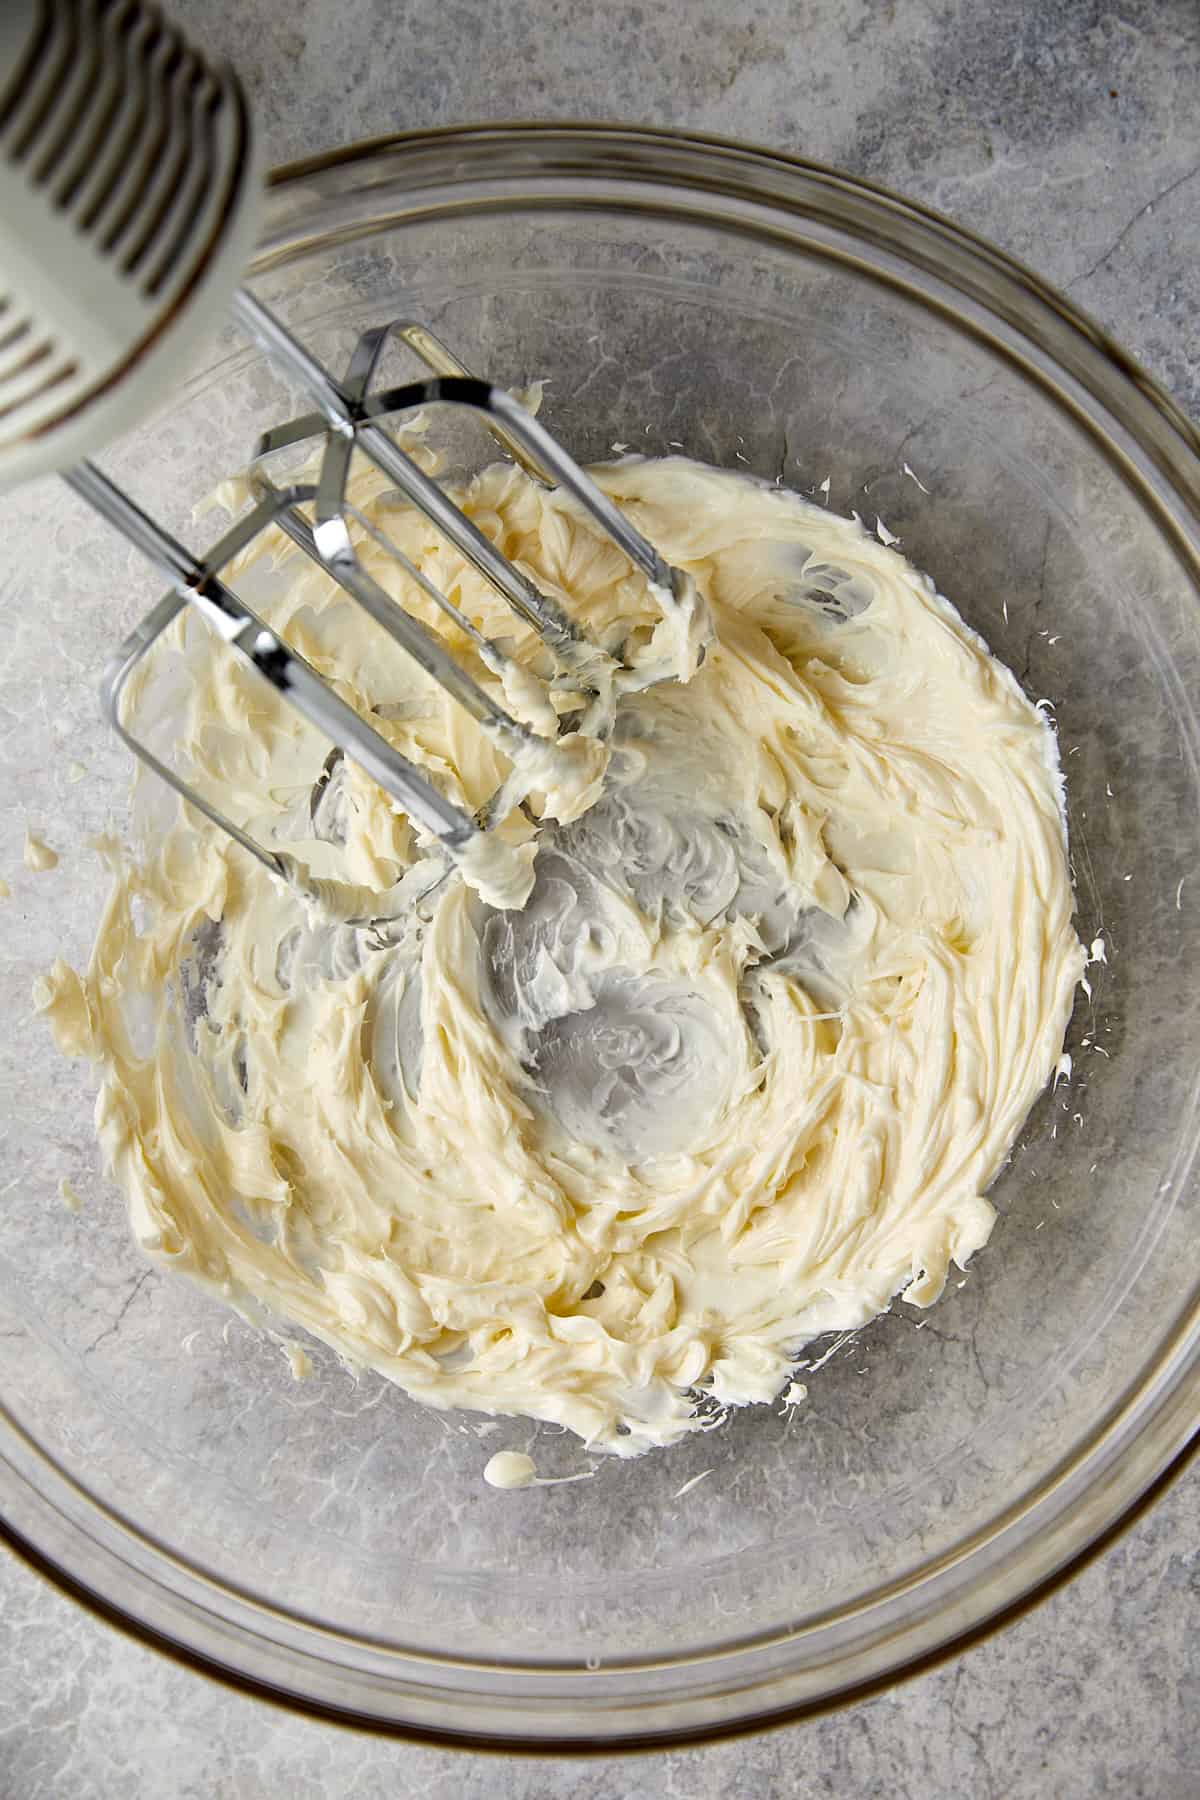 Butter and cream cheese mixed together with a handheld mixer.